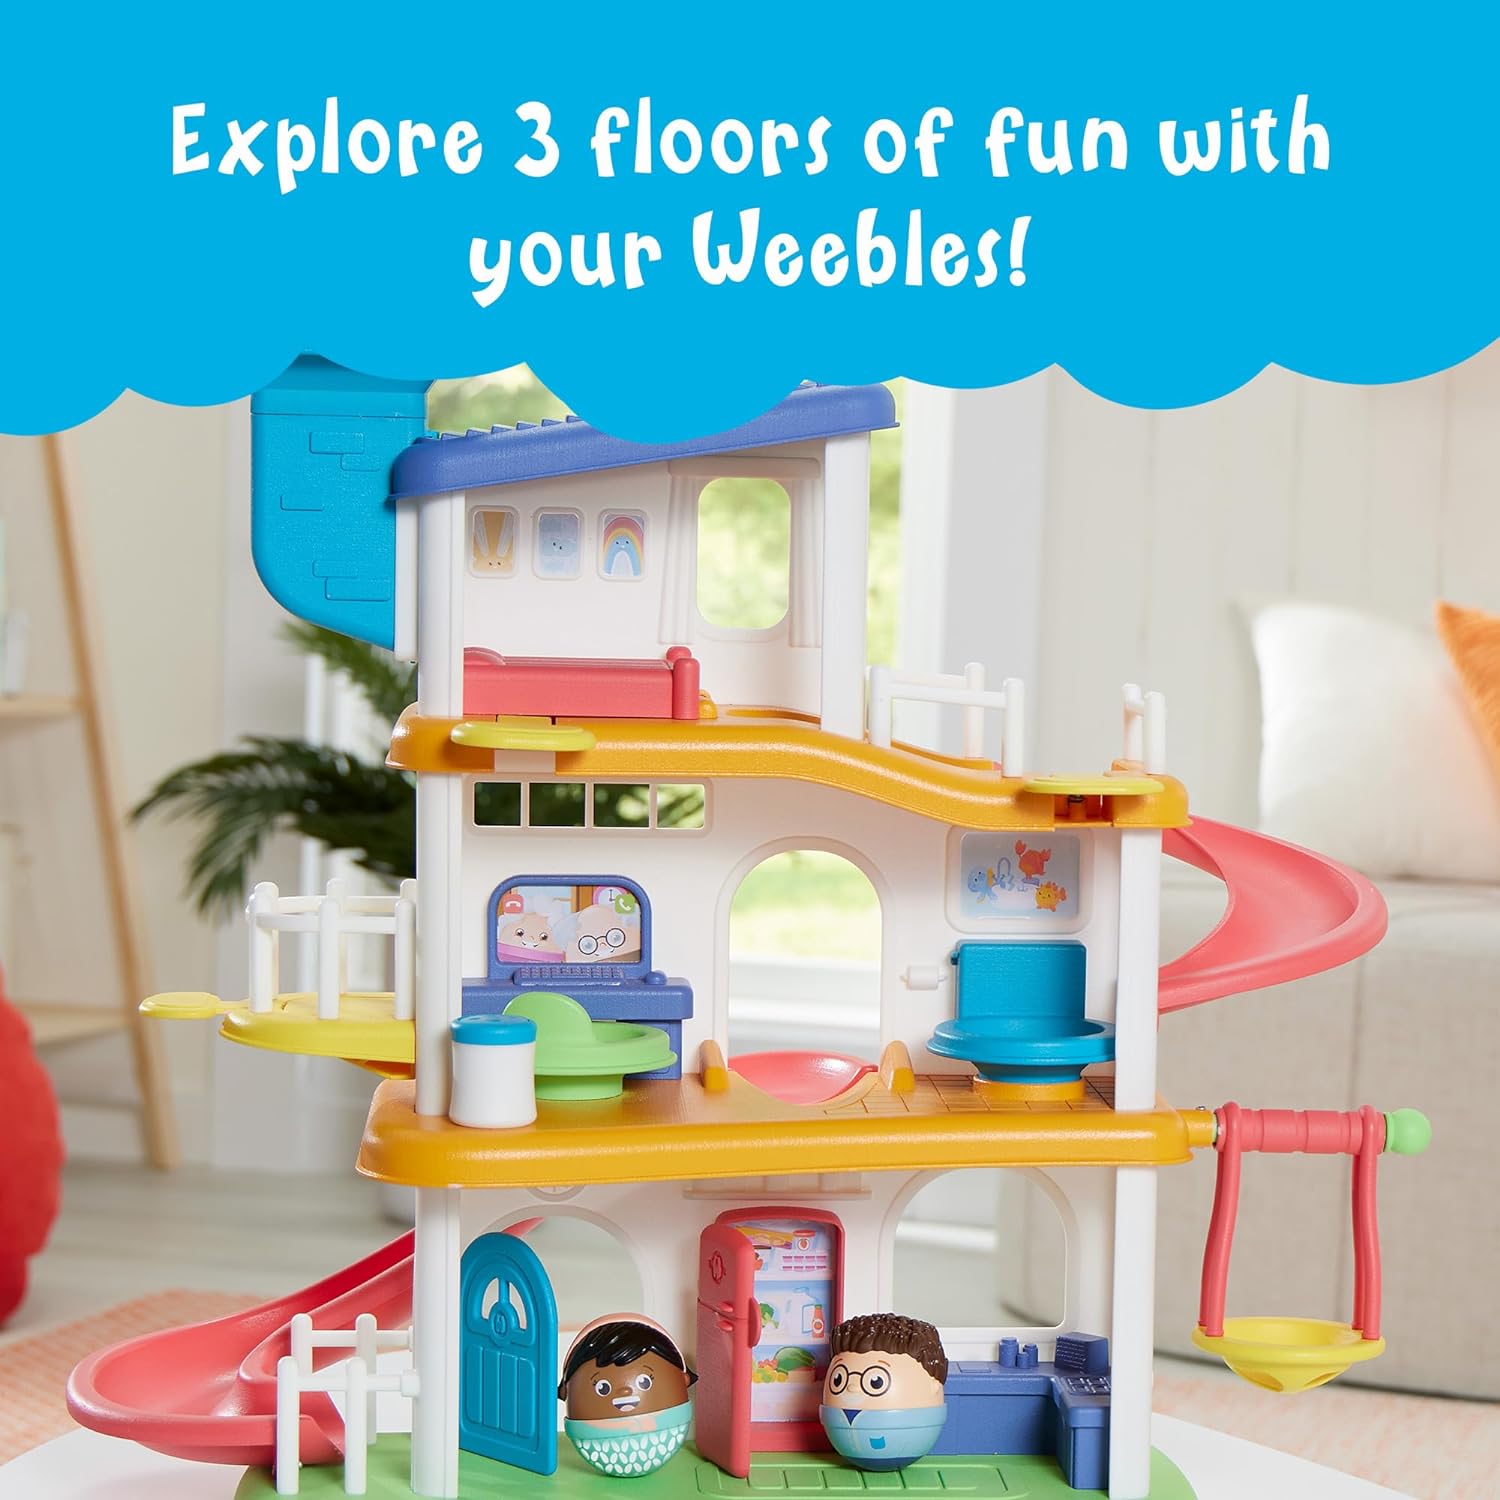 My Smart House Weebles Wobble